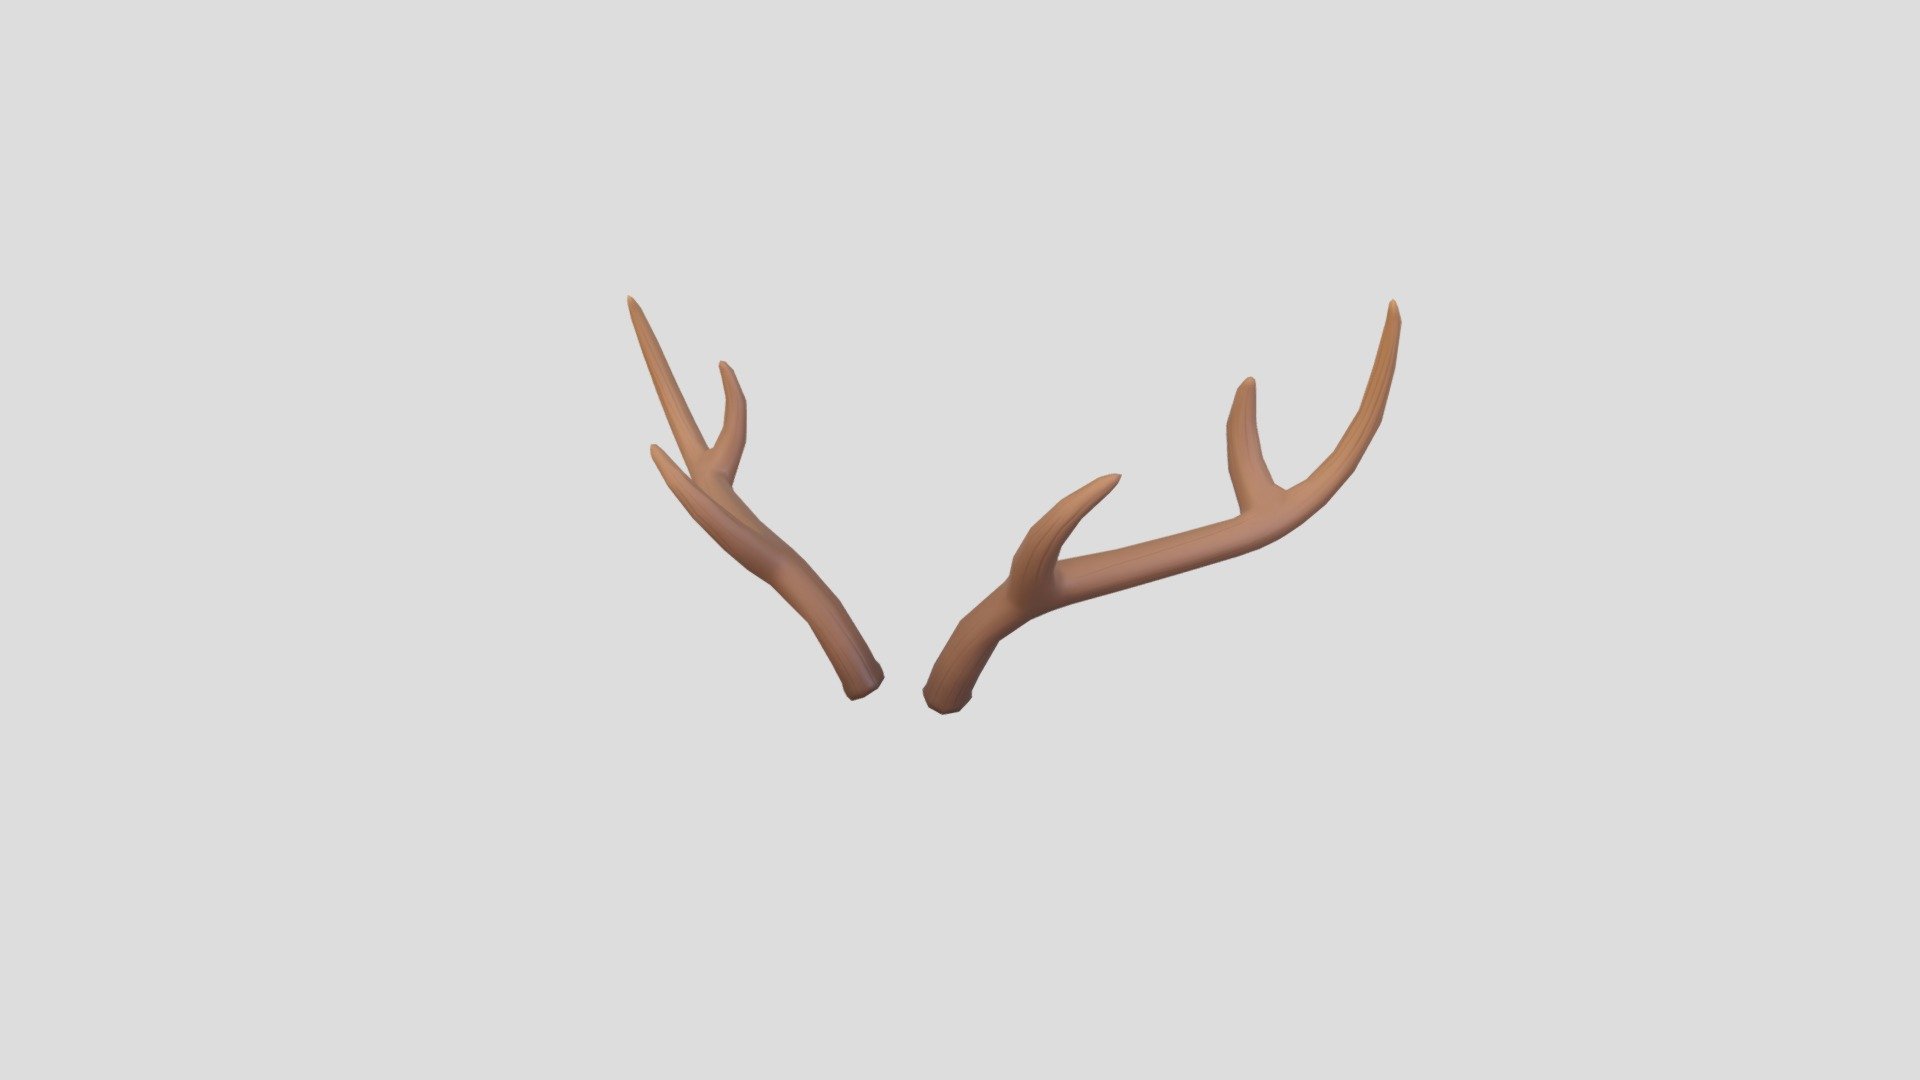 Deer Antler 3d model.      
    


File Format      
 
- 3ds max 2021  
 
- FBX  
 
- STL  
 
- OBJ  
    


Clean topology    

No Rig                          

Non-overlapping unwrapped UVs        
 


PNG texture               

2048x2048                


- Base Color                        

- Normal                            

- Roughness                         



520 polygons                          

516 vertexs                          
 - Deer Antler - Buy Royalty Free 3D model by bariacg 3d model